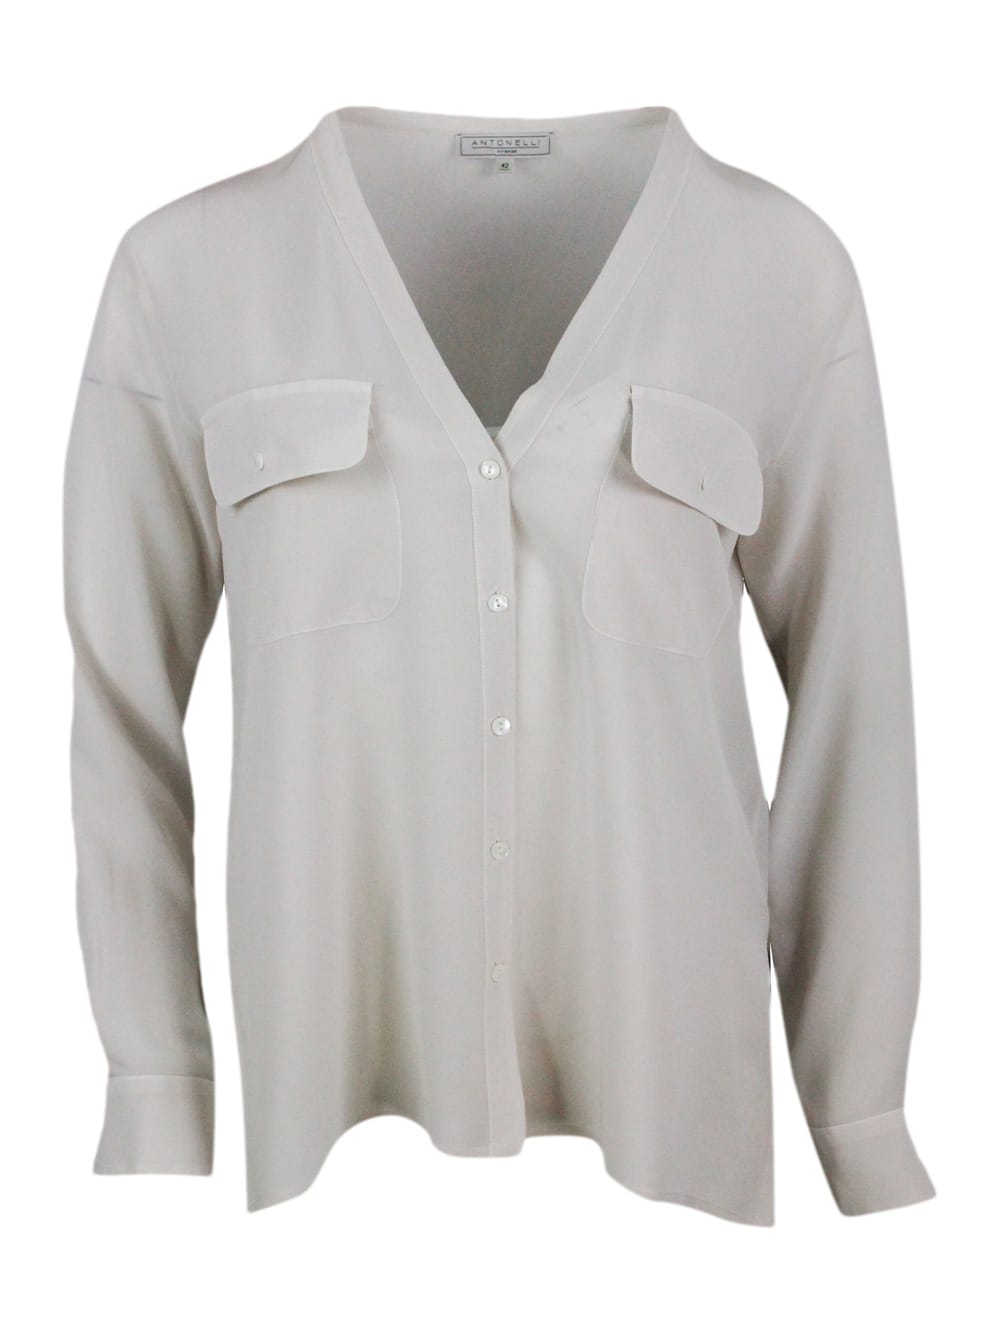 Shirt Made Of Soft Stretch Silk, With V-neck, Chest Pockets And Button Closure